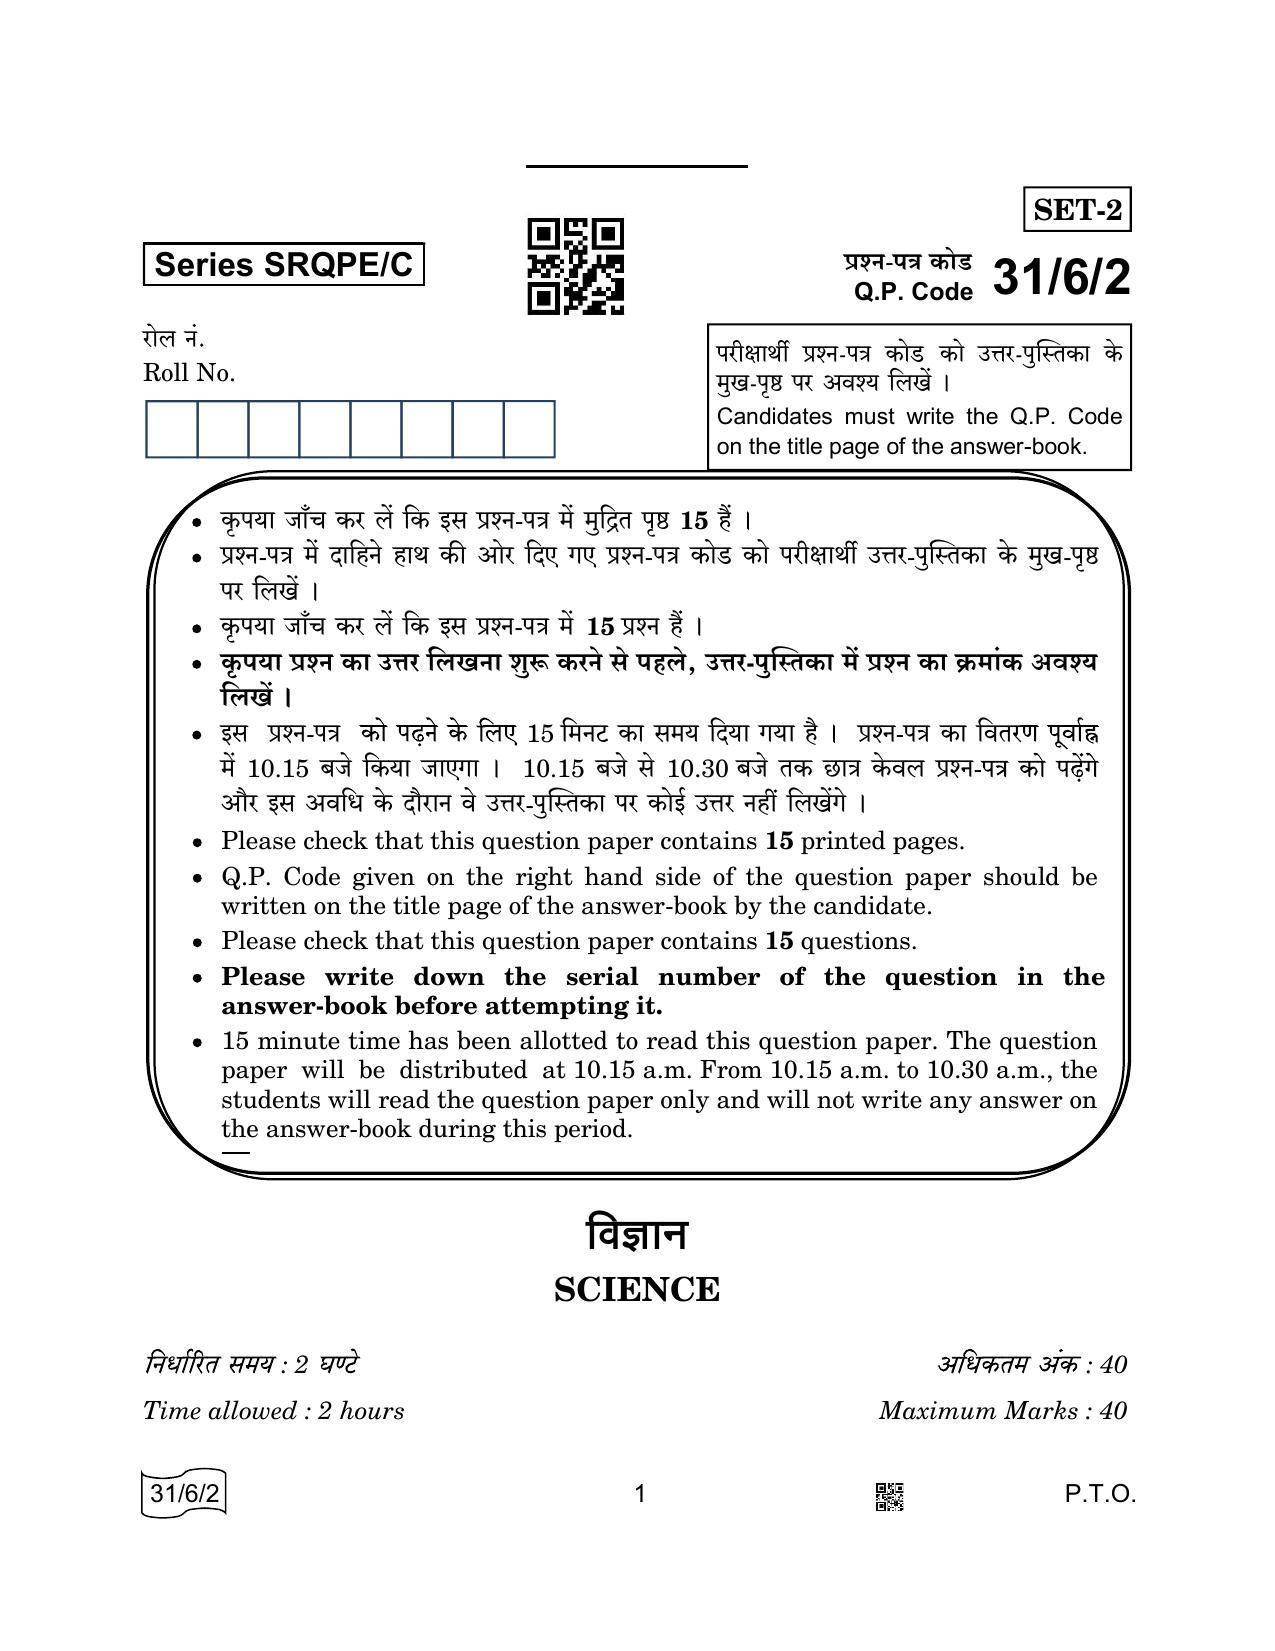 CBSE Class 10 31-6-2 SCIENCE 2022 Compartment Question Paper - Page 1